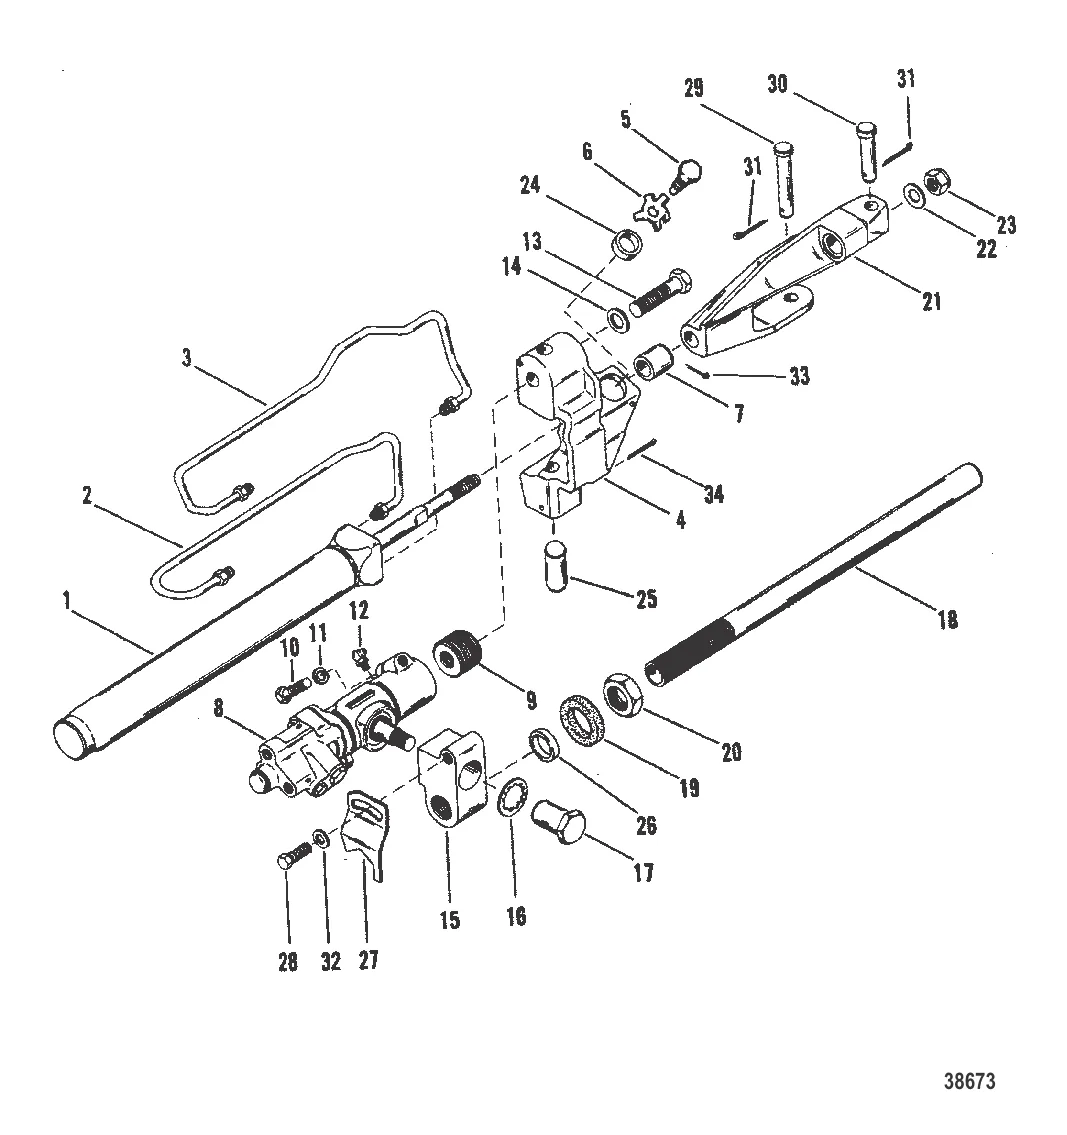 POWER STEERING COMPONENTS (OLD DESIGN)